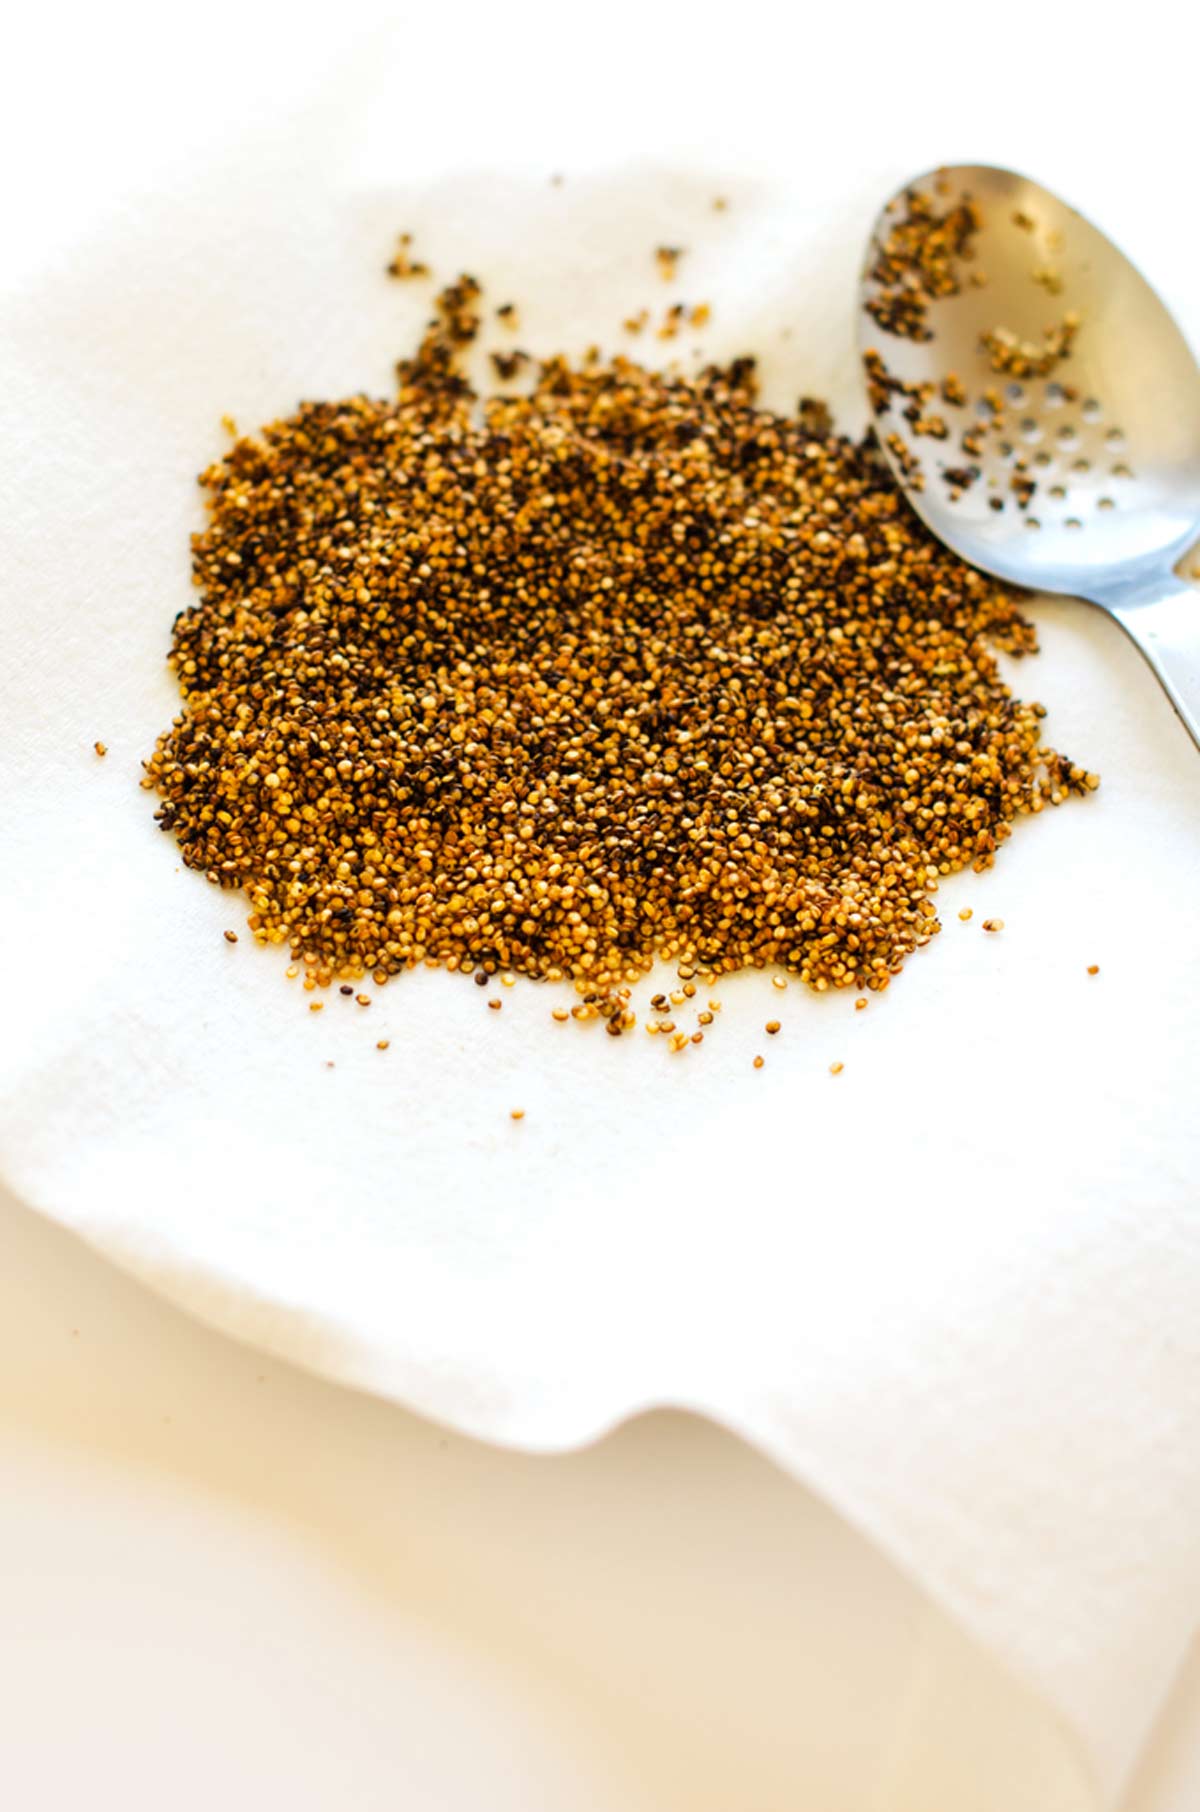 Photo of a paper towel lined plate with crispy quinoa on it.